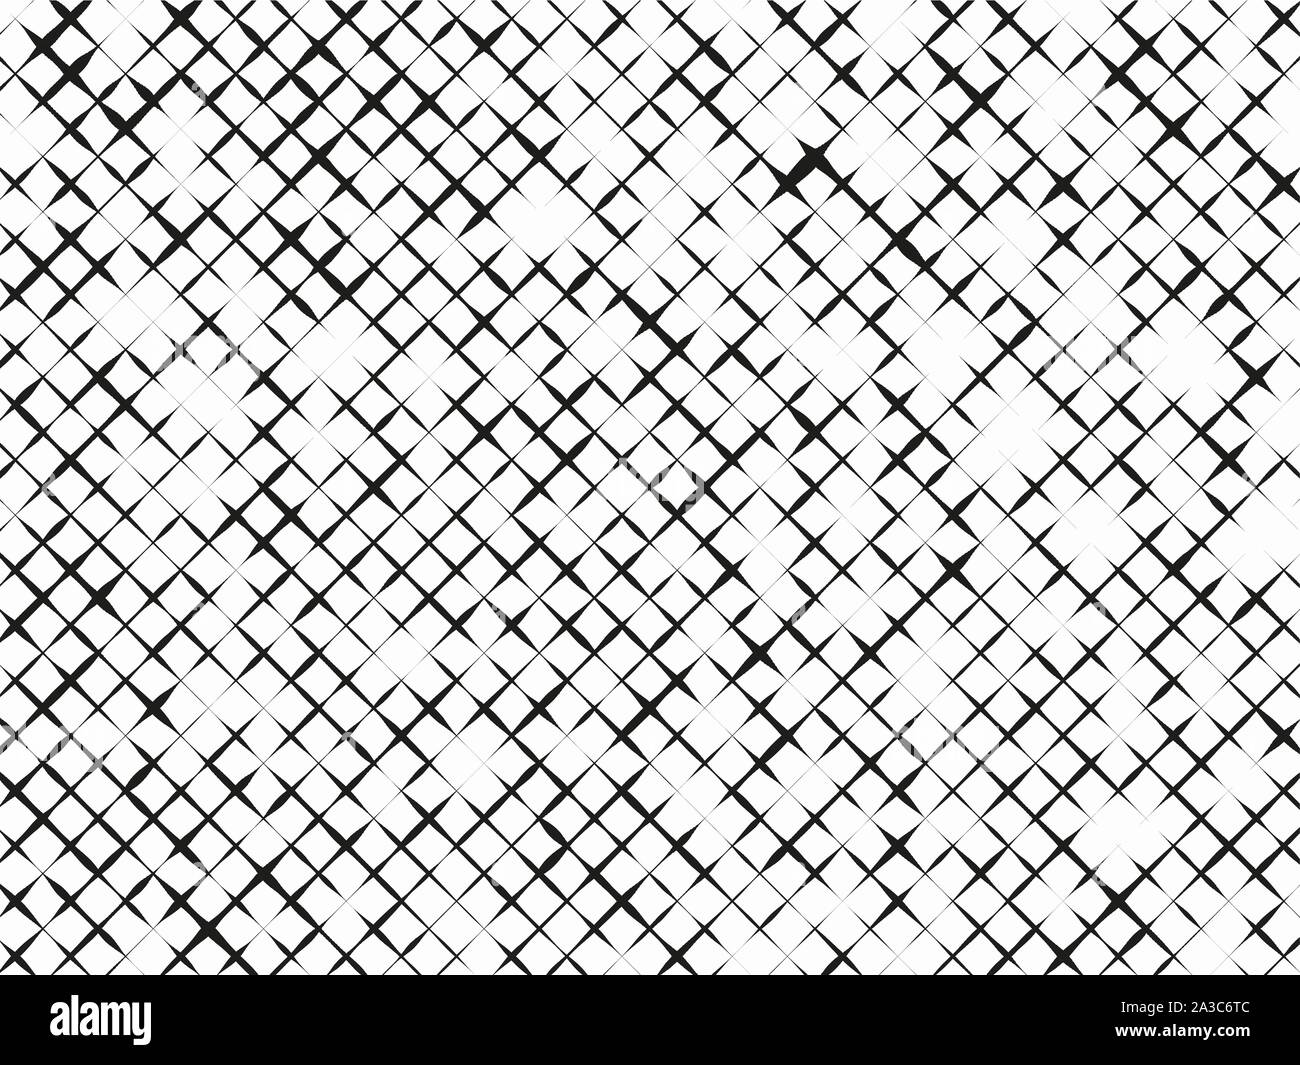 Abstract Geometric Pattern With Diagonal Overlapping Stripes And